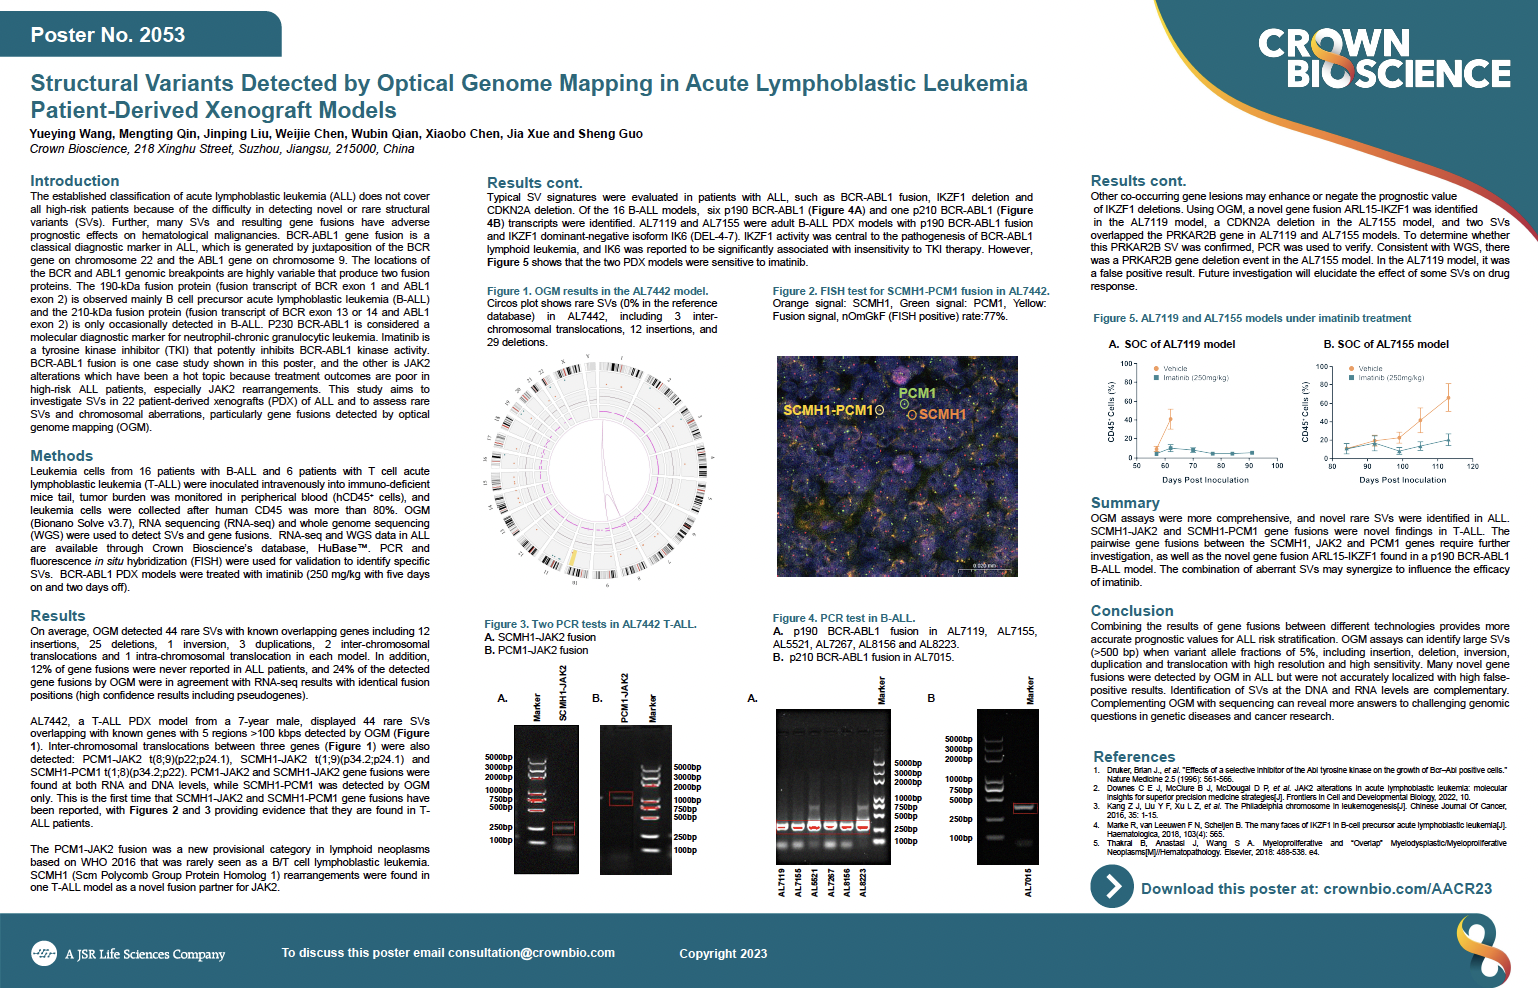 AACR 2023 Posters 2053: Structural Variants Detected by Optical Genome Mapping in Acute Lymphoblastic Leukemia Patient-Derived Xenograft Models